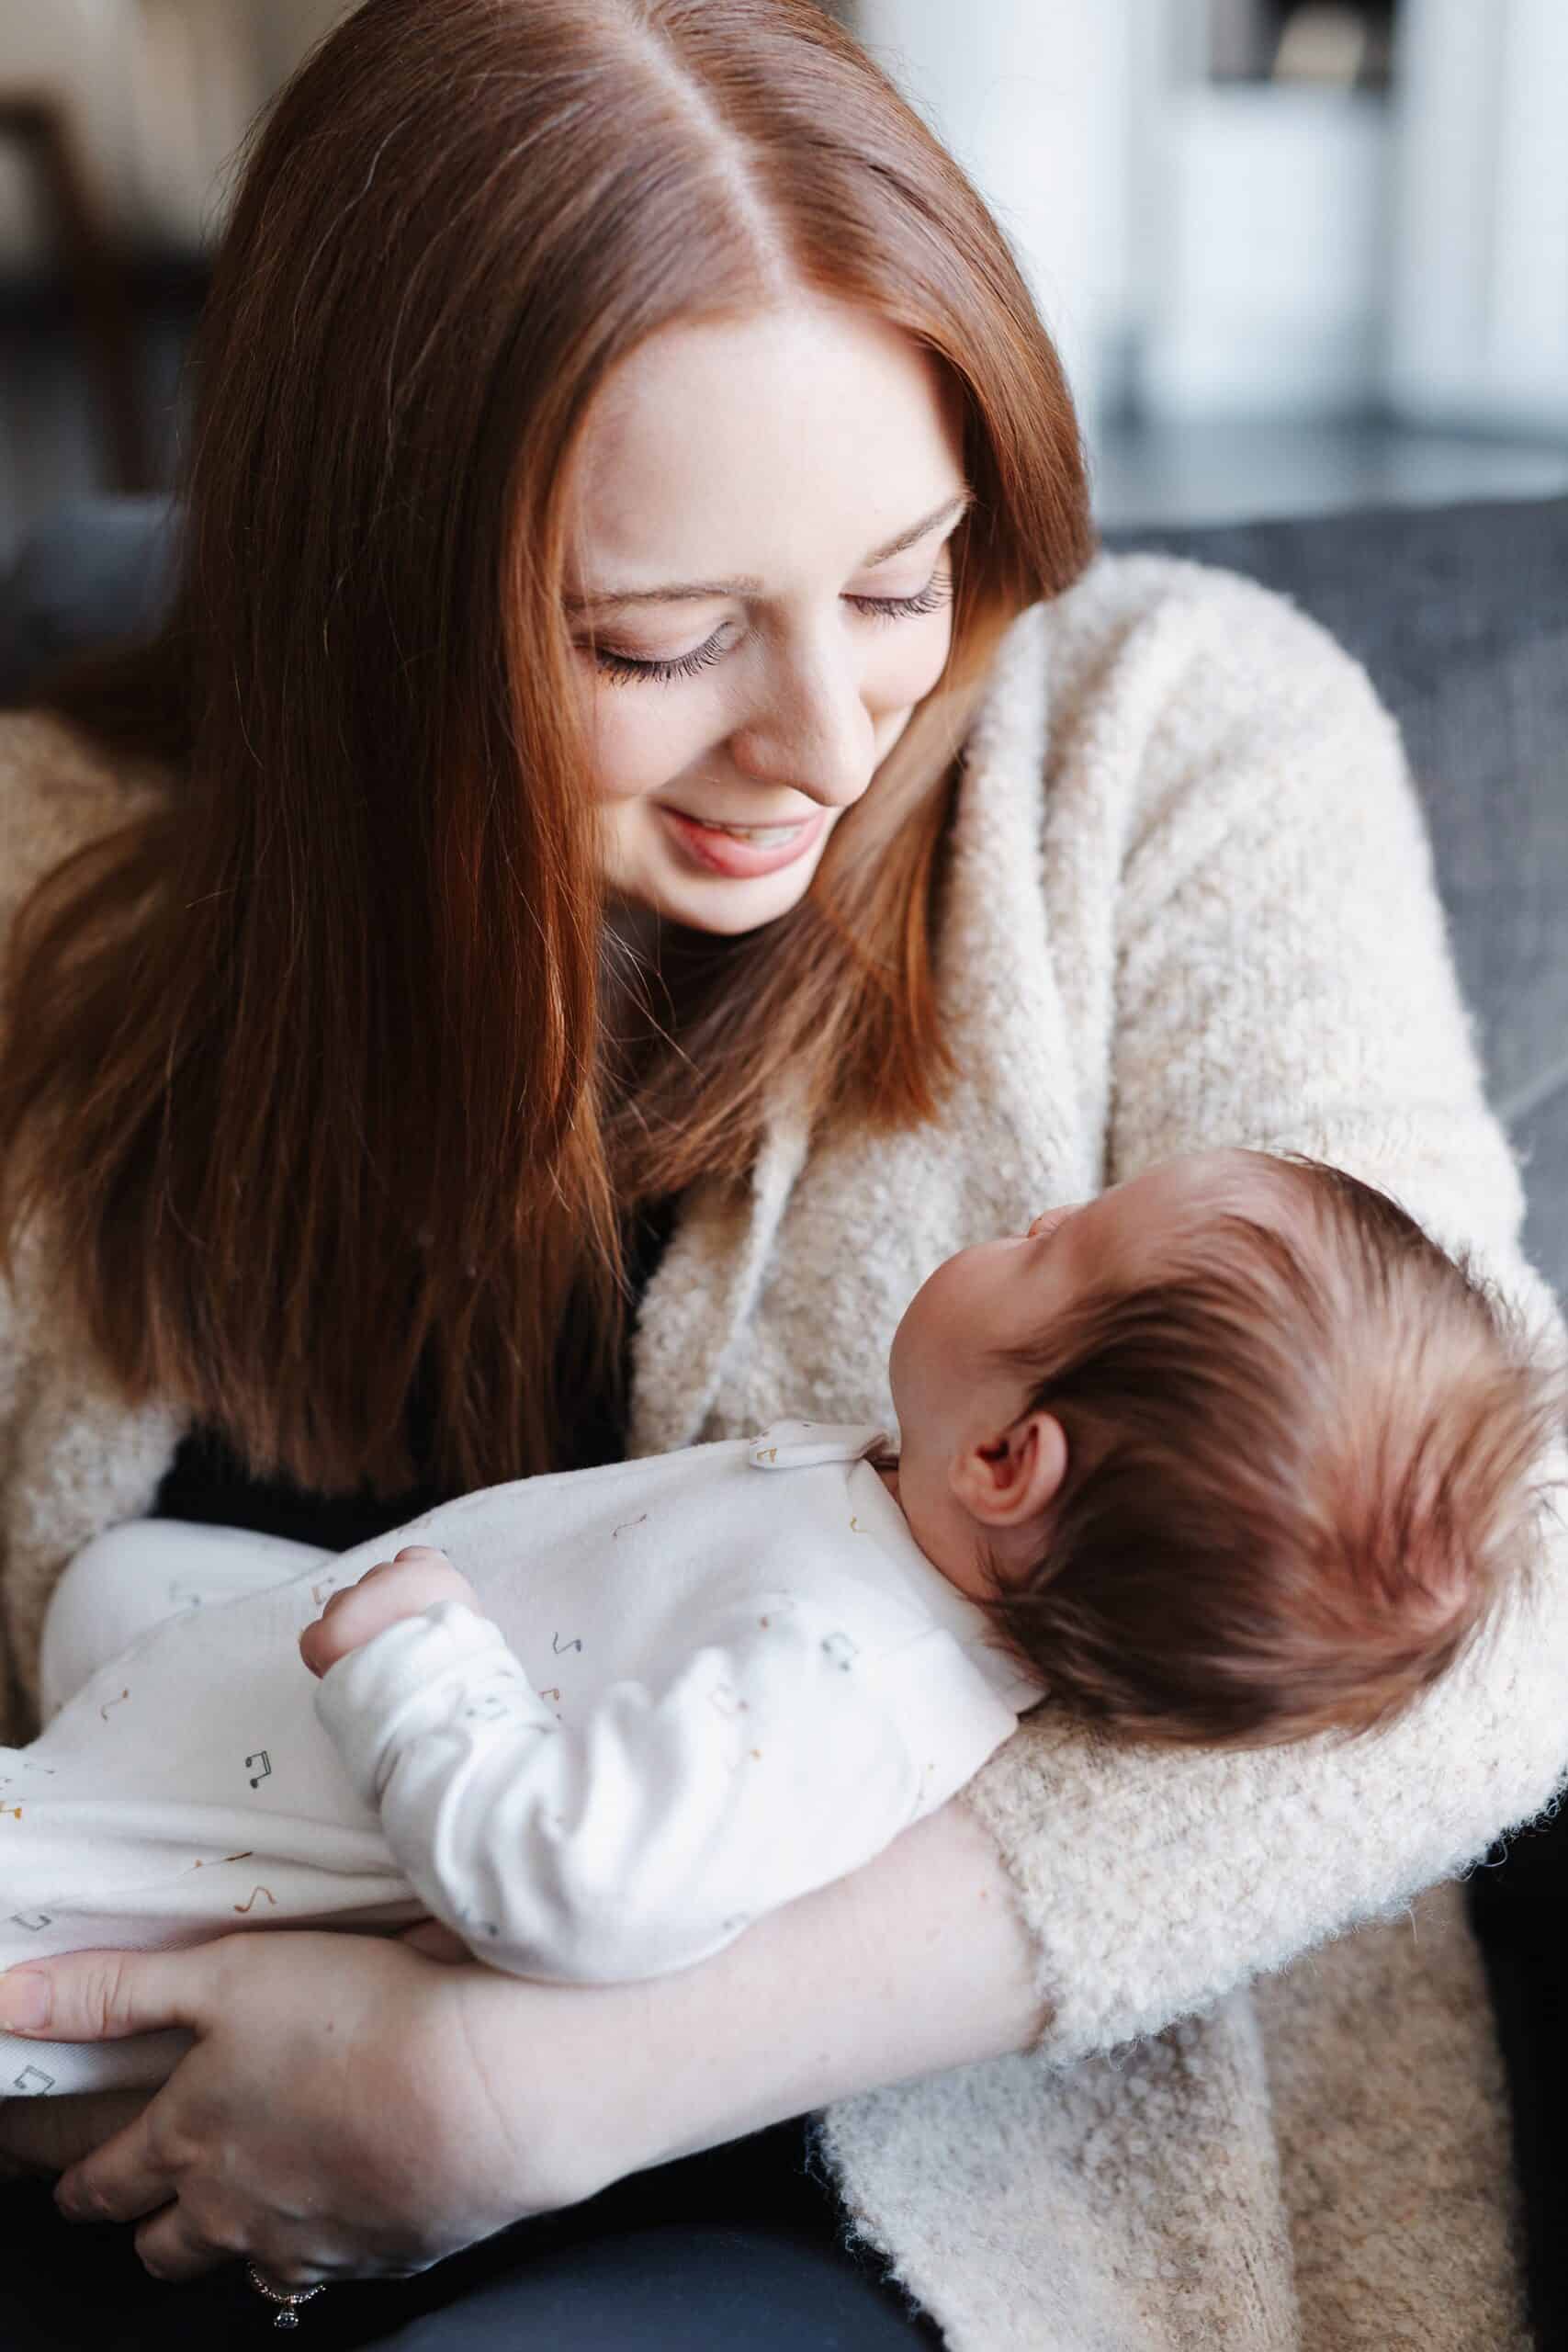 A mother in a beige sweater sits on a couch smiling down to her newborn baby in her arms